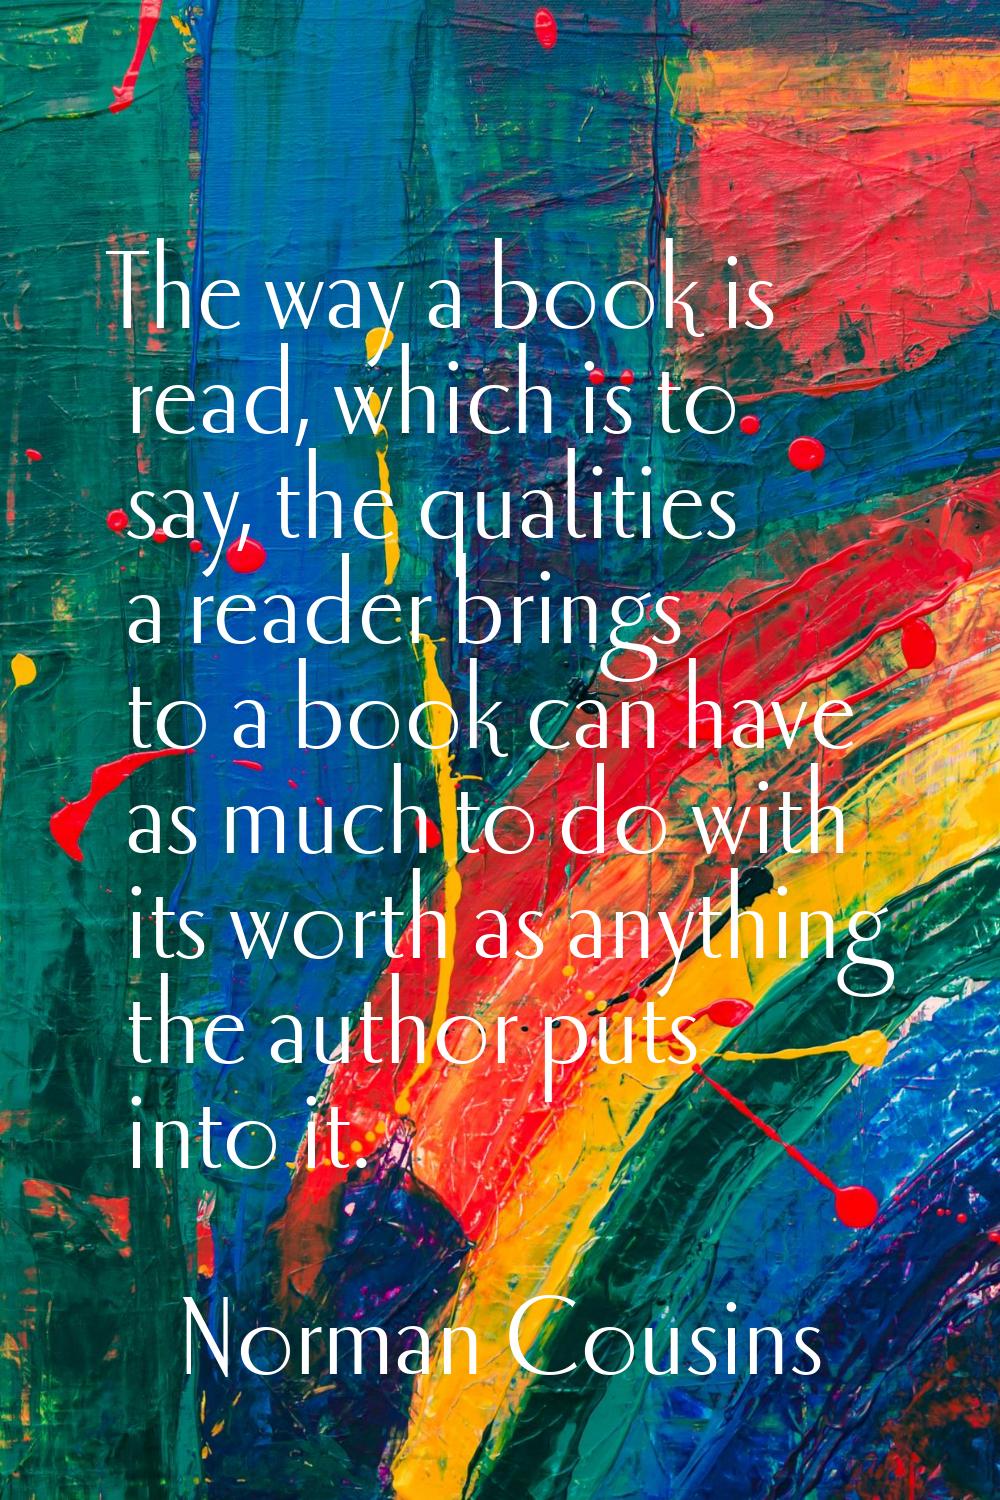 The way a book is read, which is to say, the qualities a reader brings to a book can have as much t